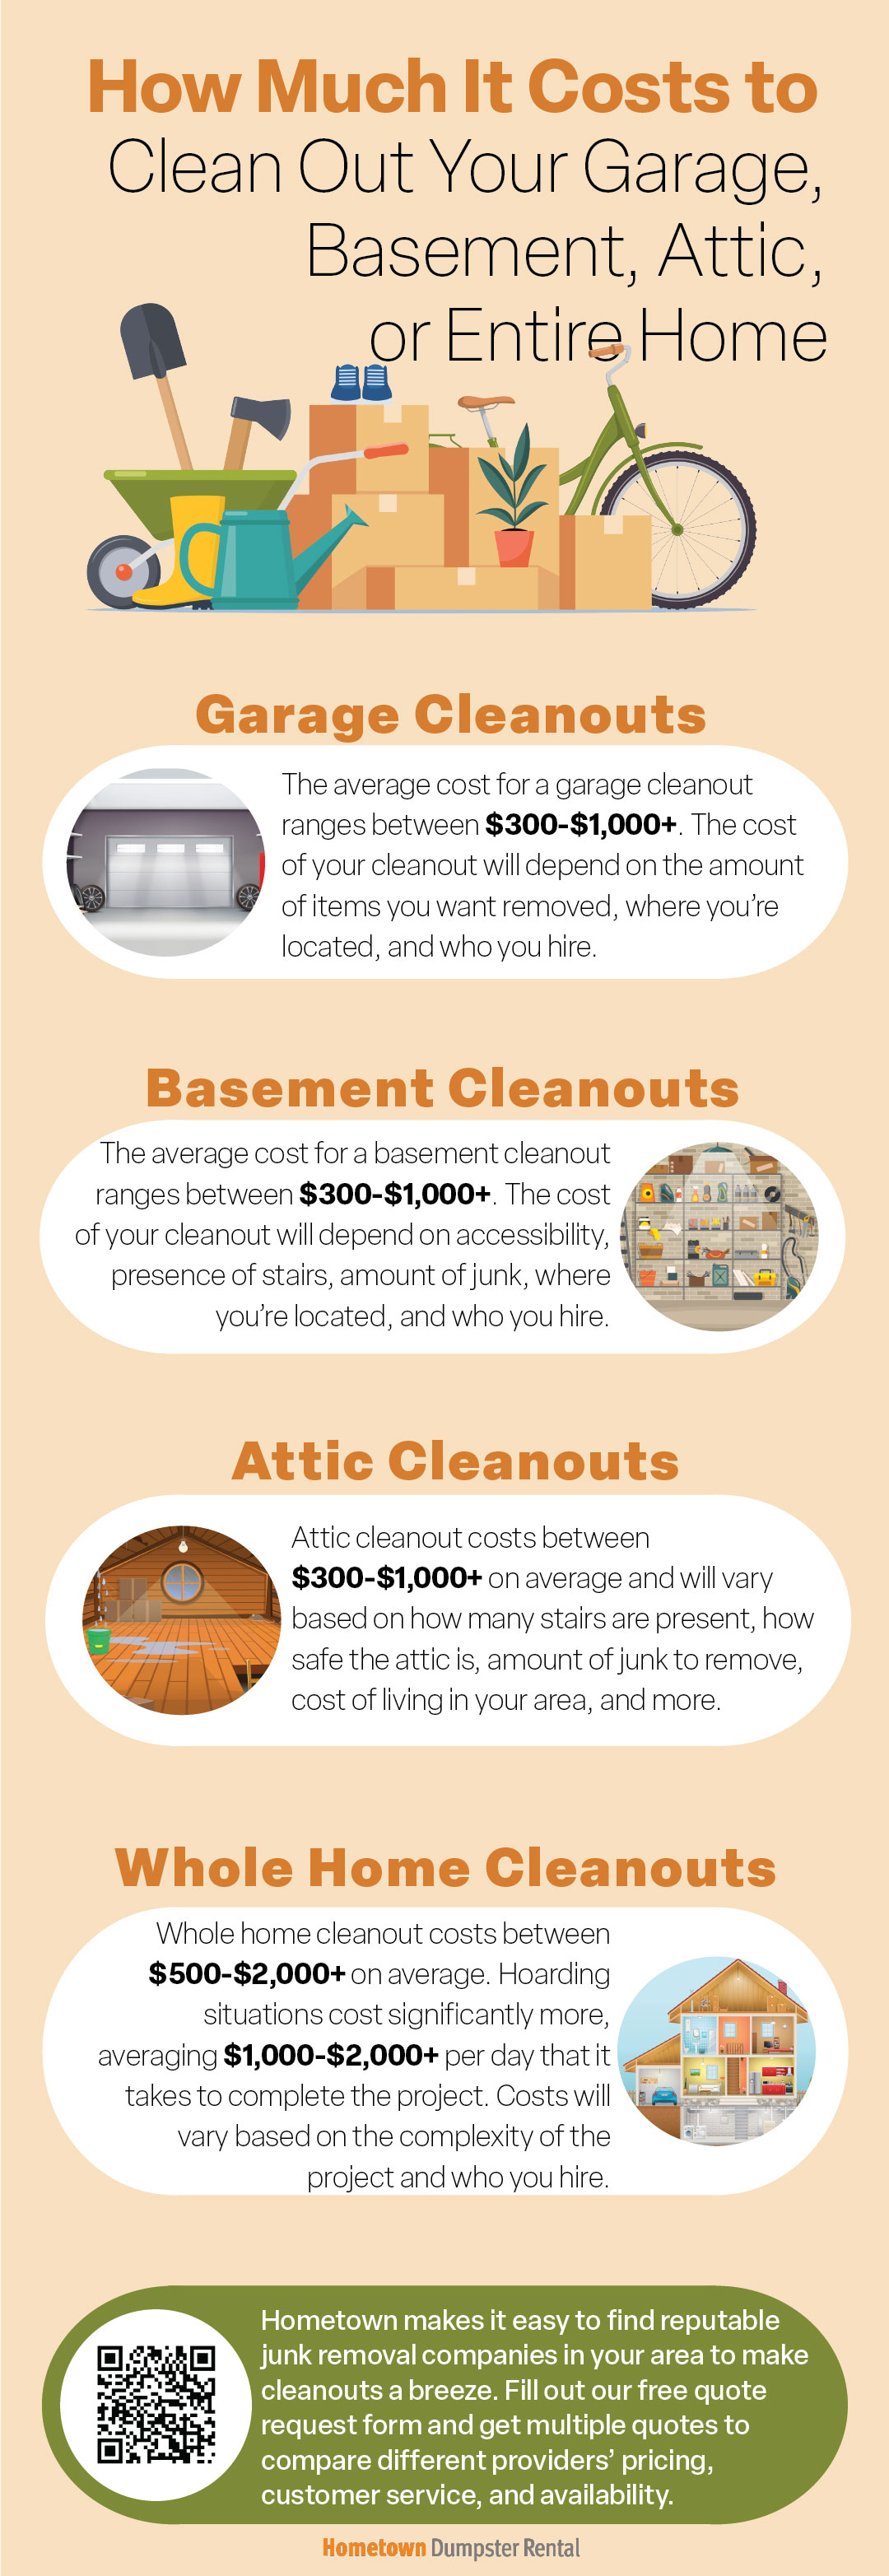 How Much It Costs to Clean Out Your Garage, Basement, Attic, or Entire Home Infographic